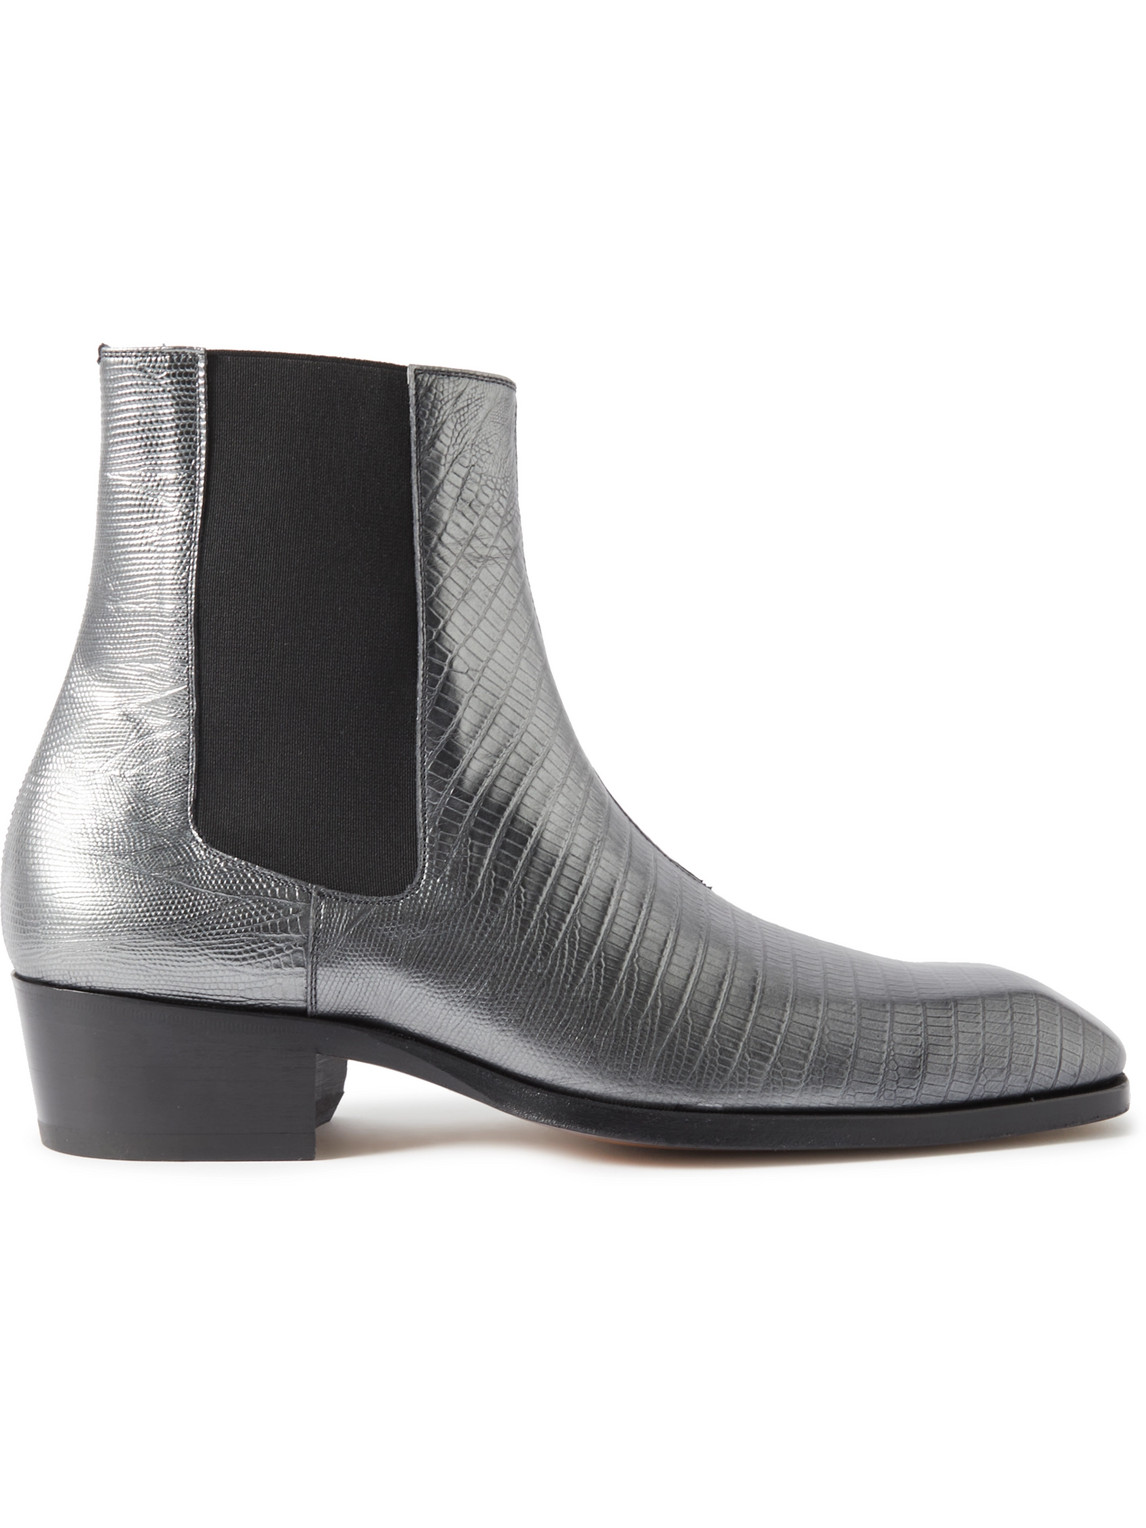 Tom Ford Tejus Bailey Metallic Lizard-effect Leather Chelsea Boots In Silver